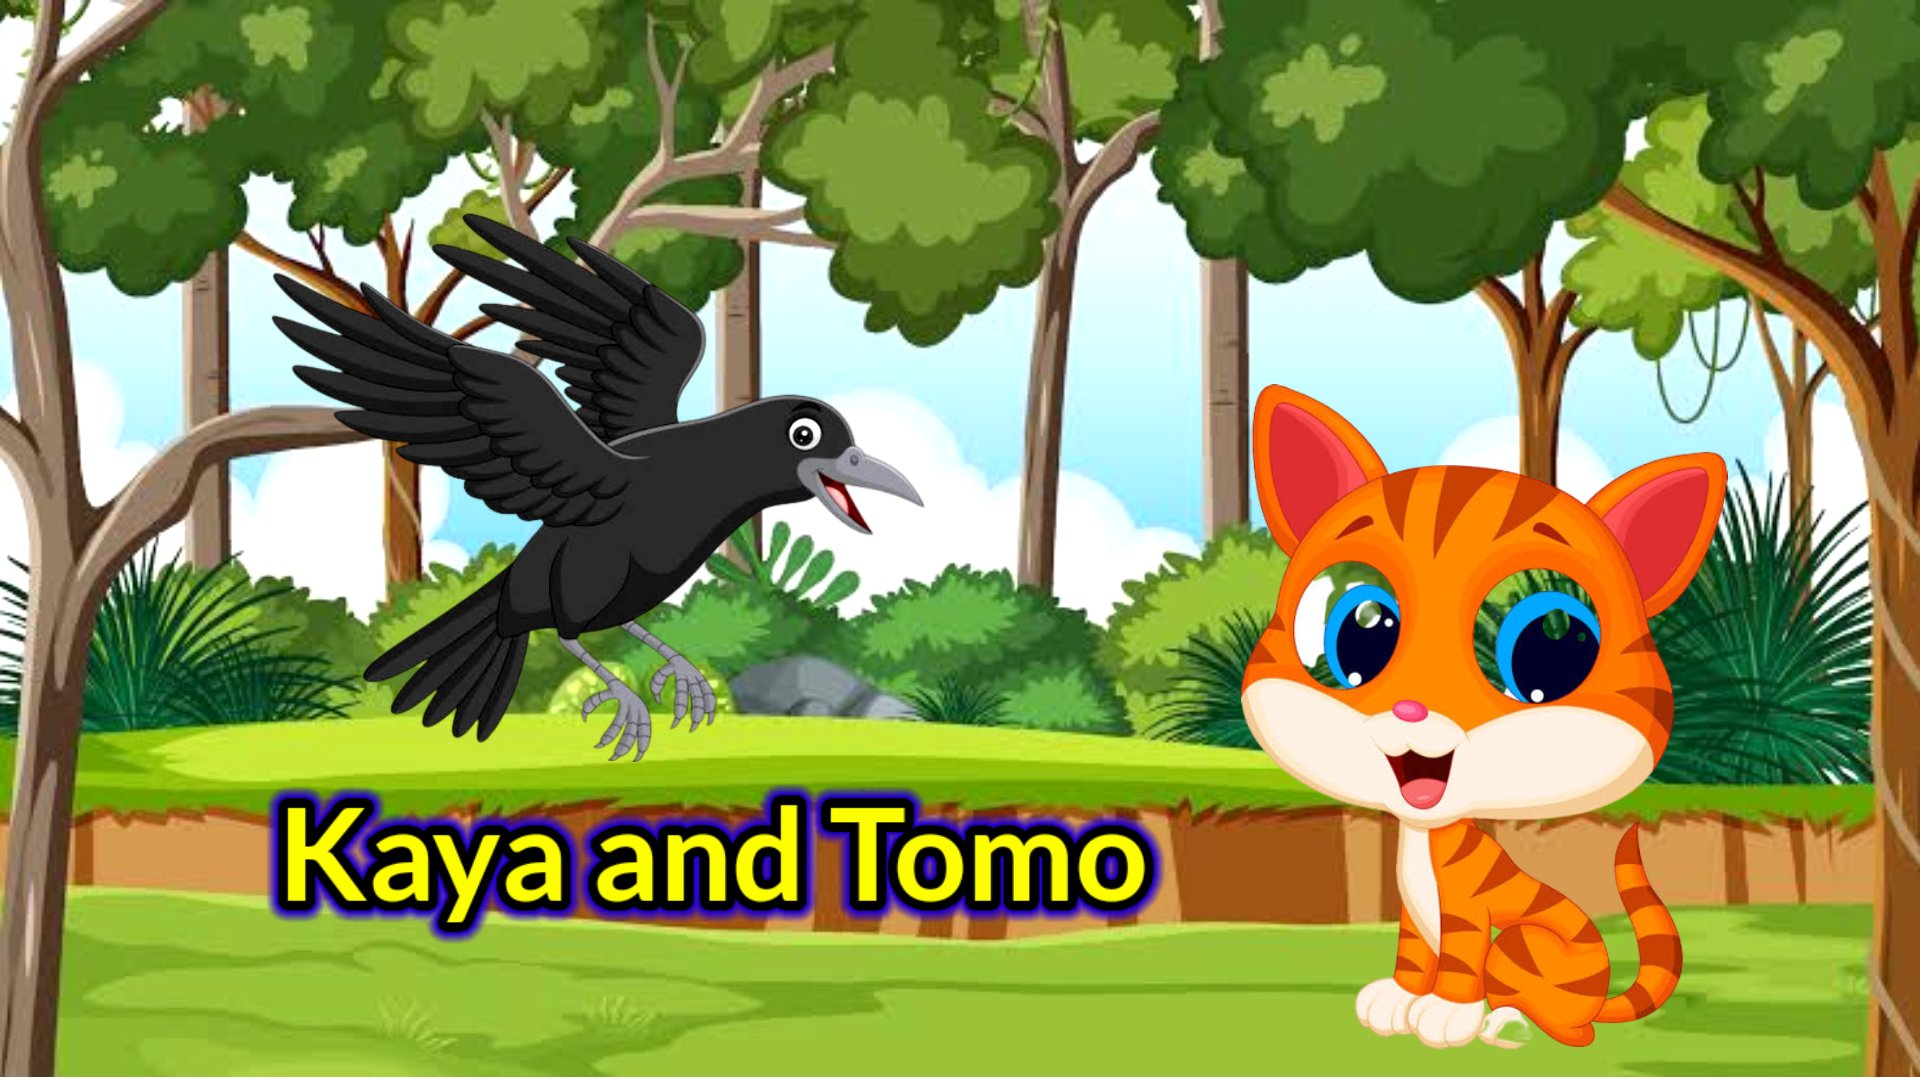 Kaya and Tomo: Unbreakable Friendship of a Crow and the Cat, English Story Written by Amrit Sahu